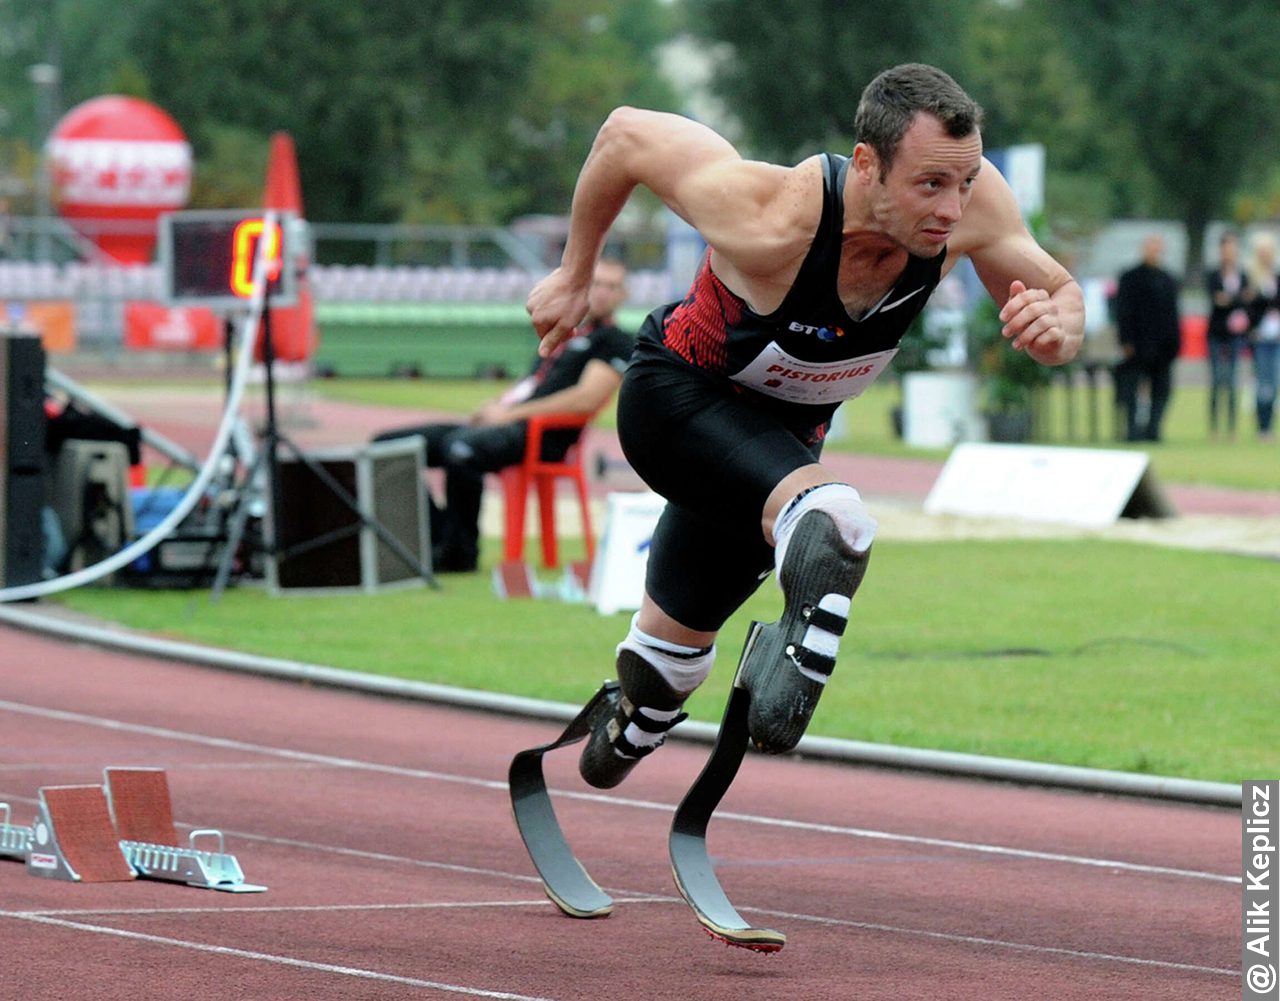 Oscar Pistorius driving out of block at a track meet over 400m on his blades